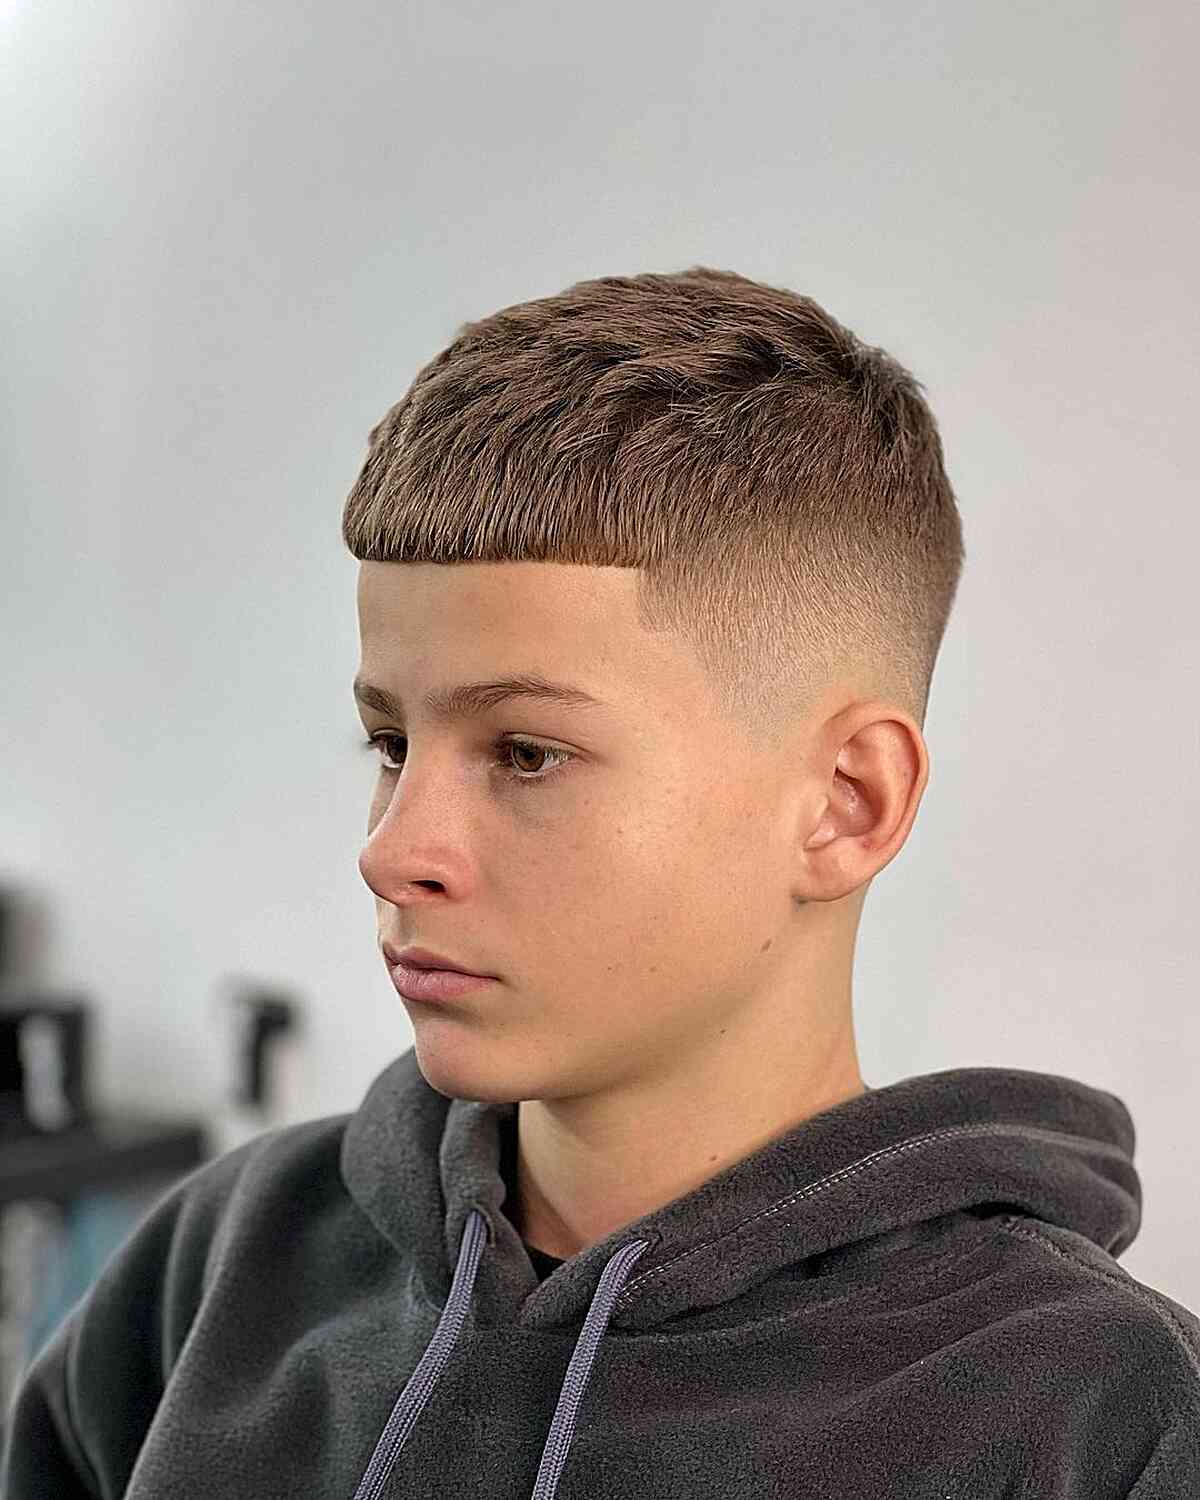 Brushed Forward Fade Cut for Teen Boys with a bald fade on the sides and back